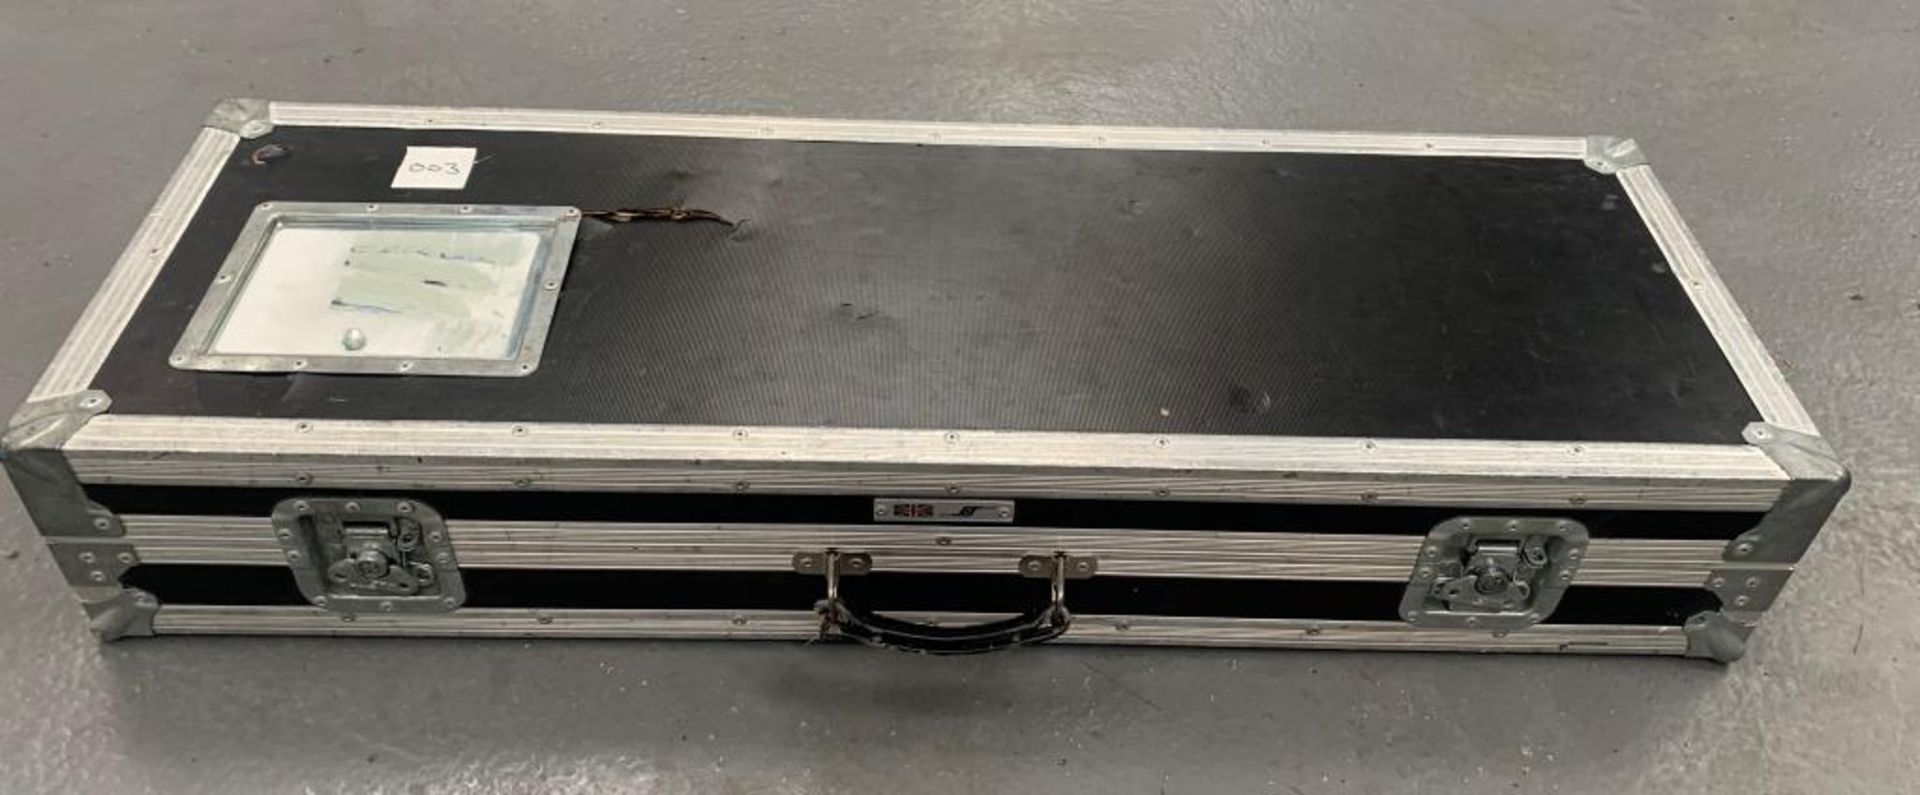 5 Star Cases Lined Flight Case - int. dimensions 105 x 34 x 9cm